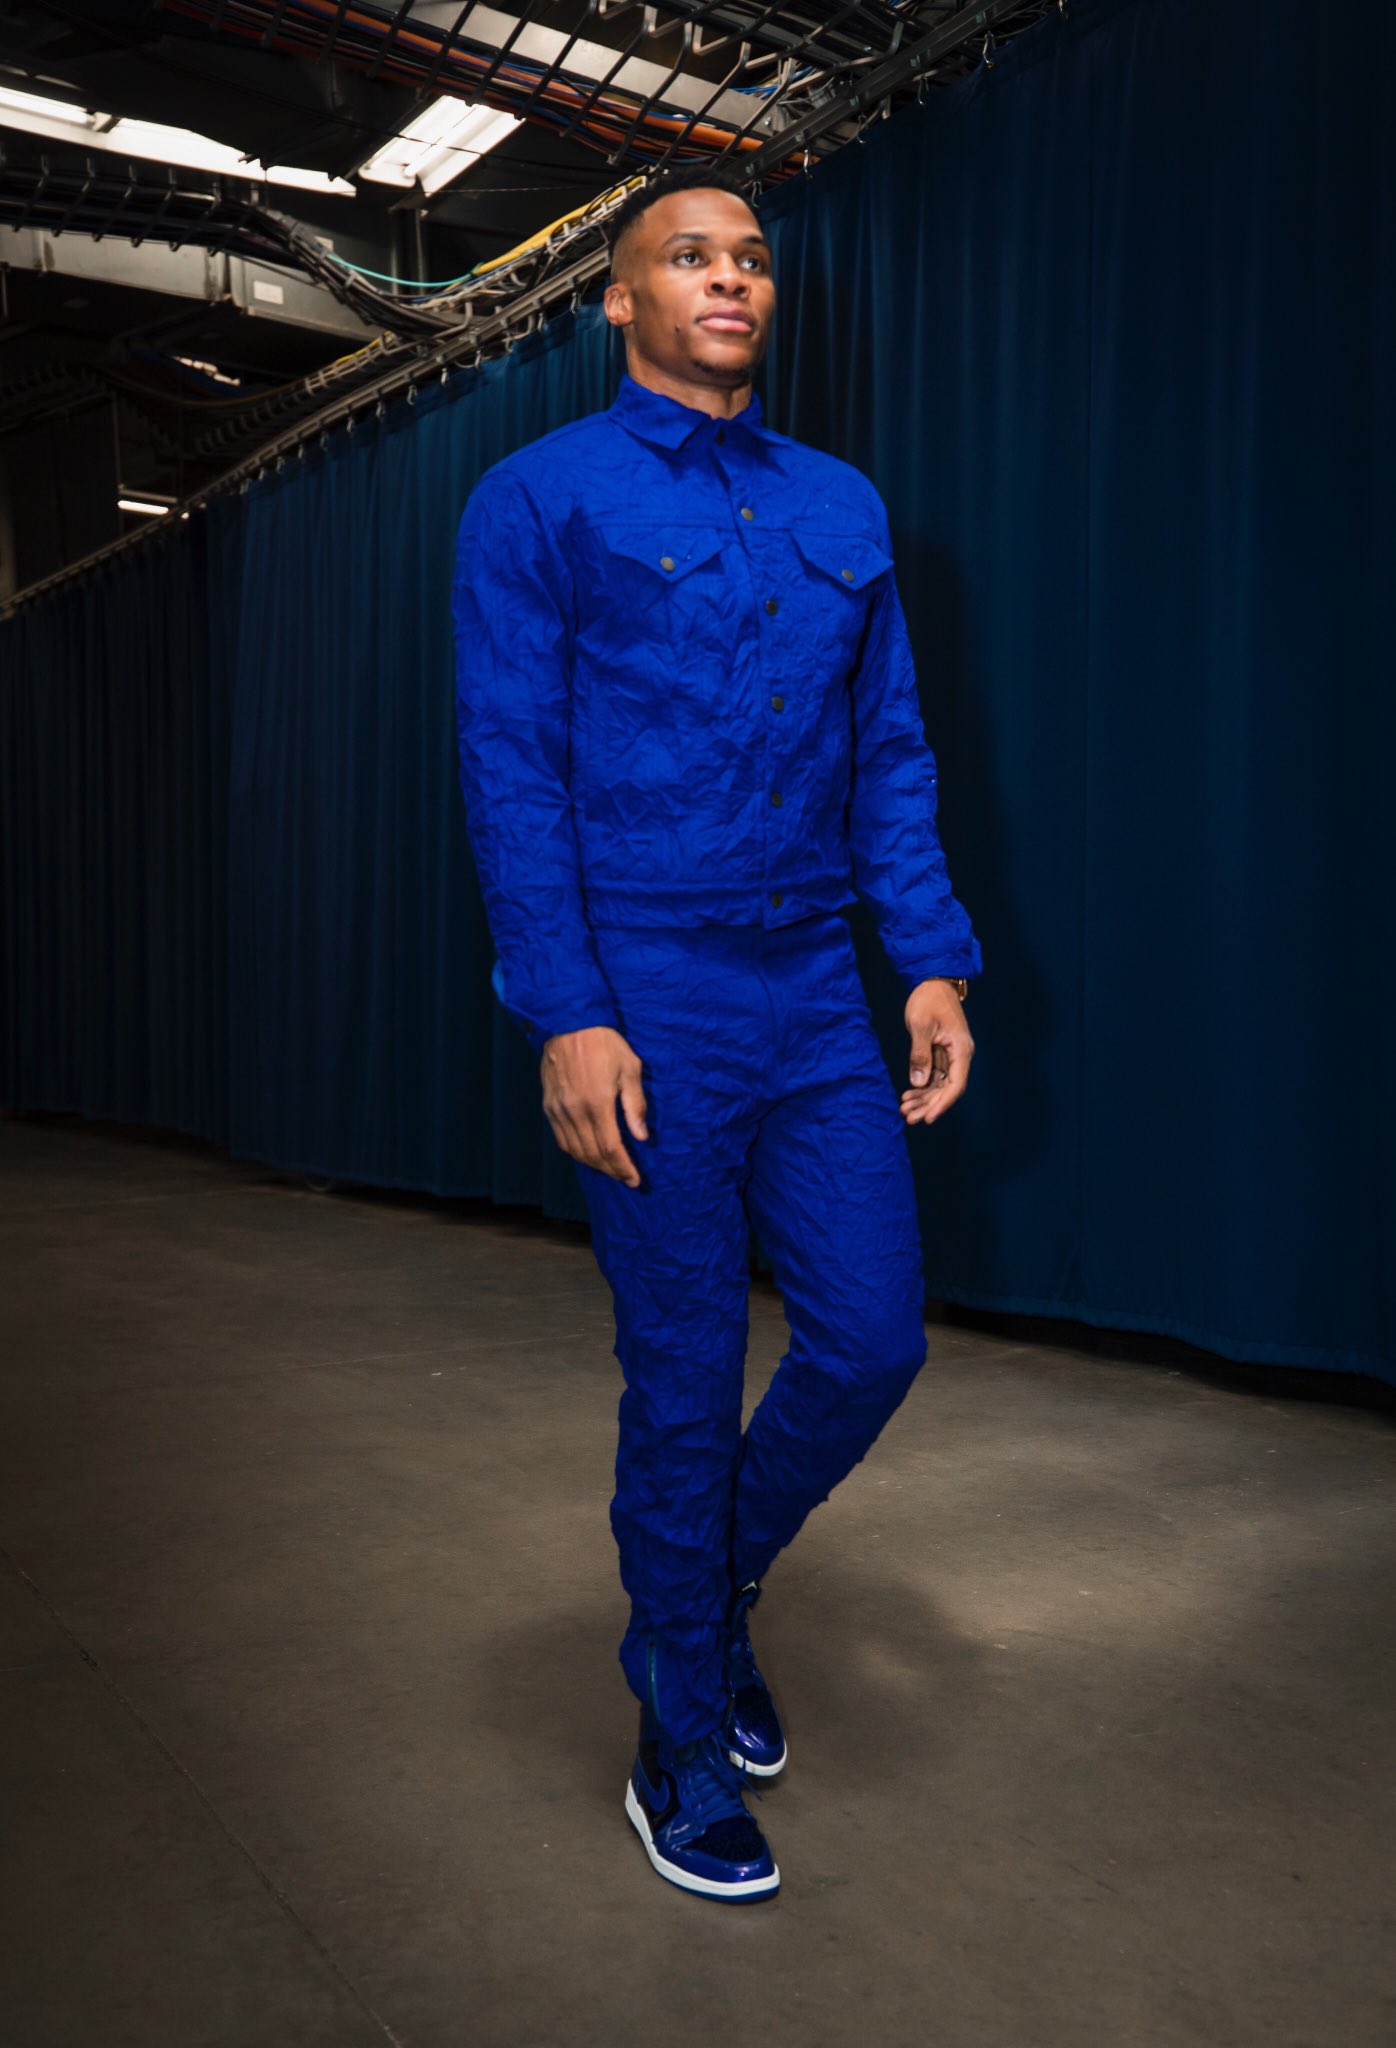 Happy 30th birthday to Russell Westbrook 